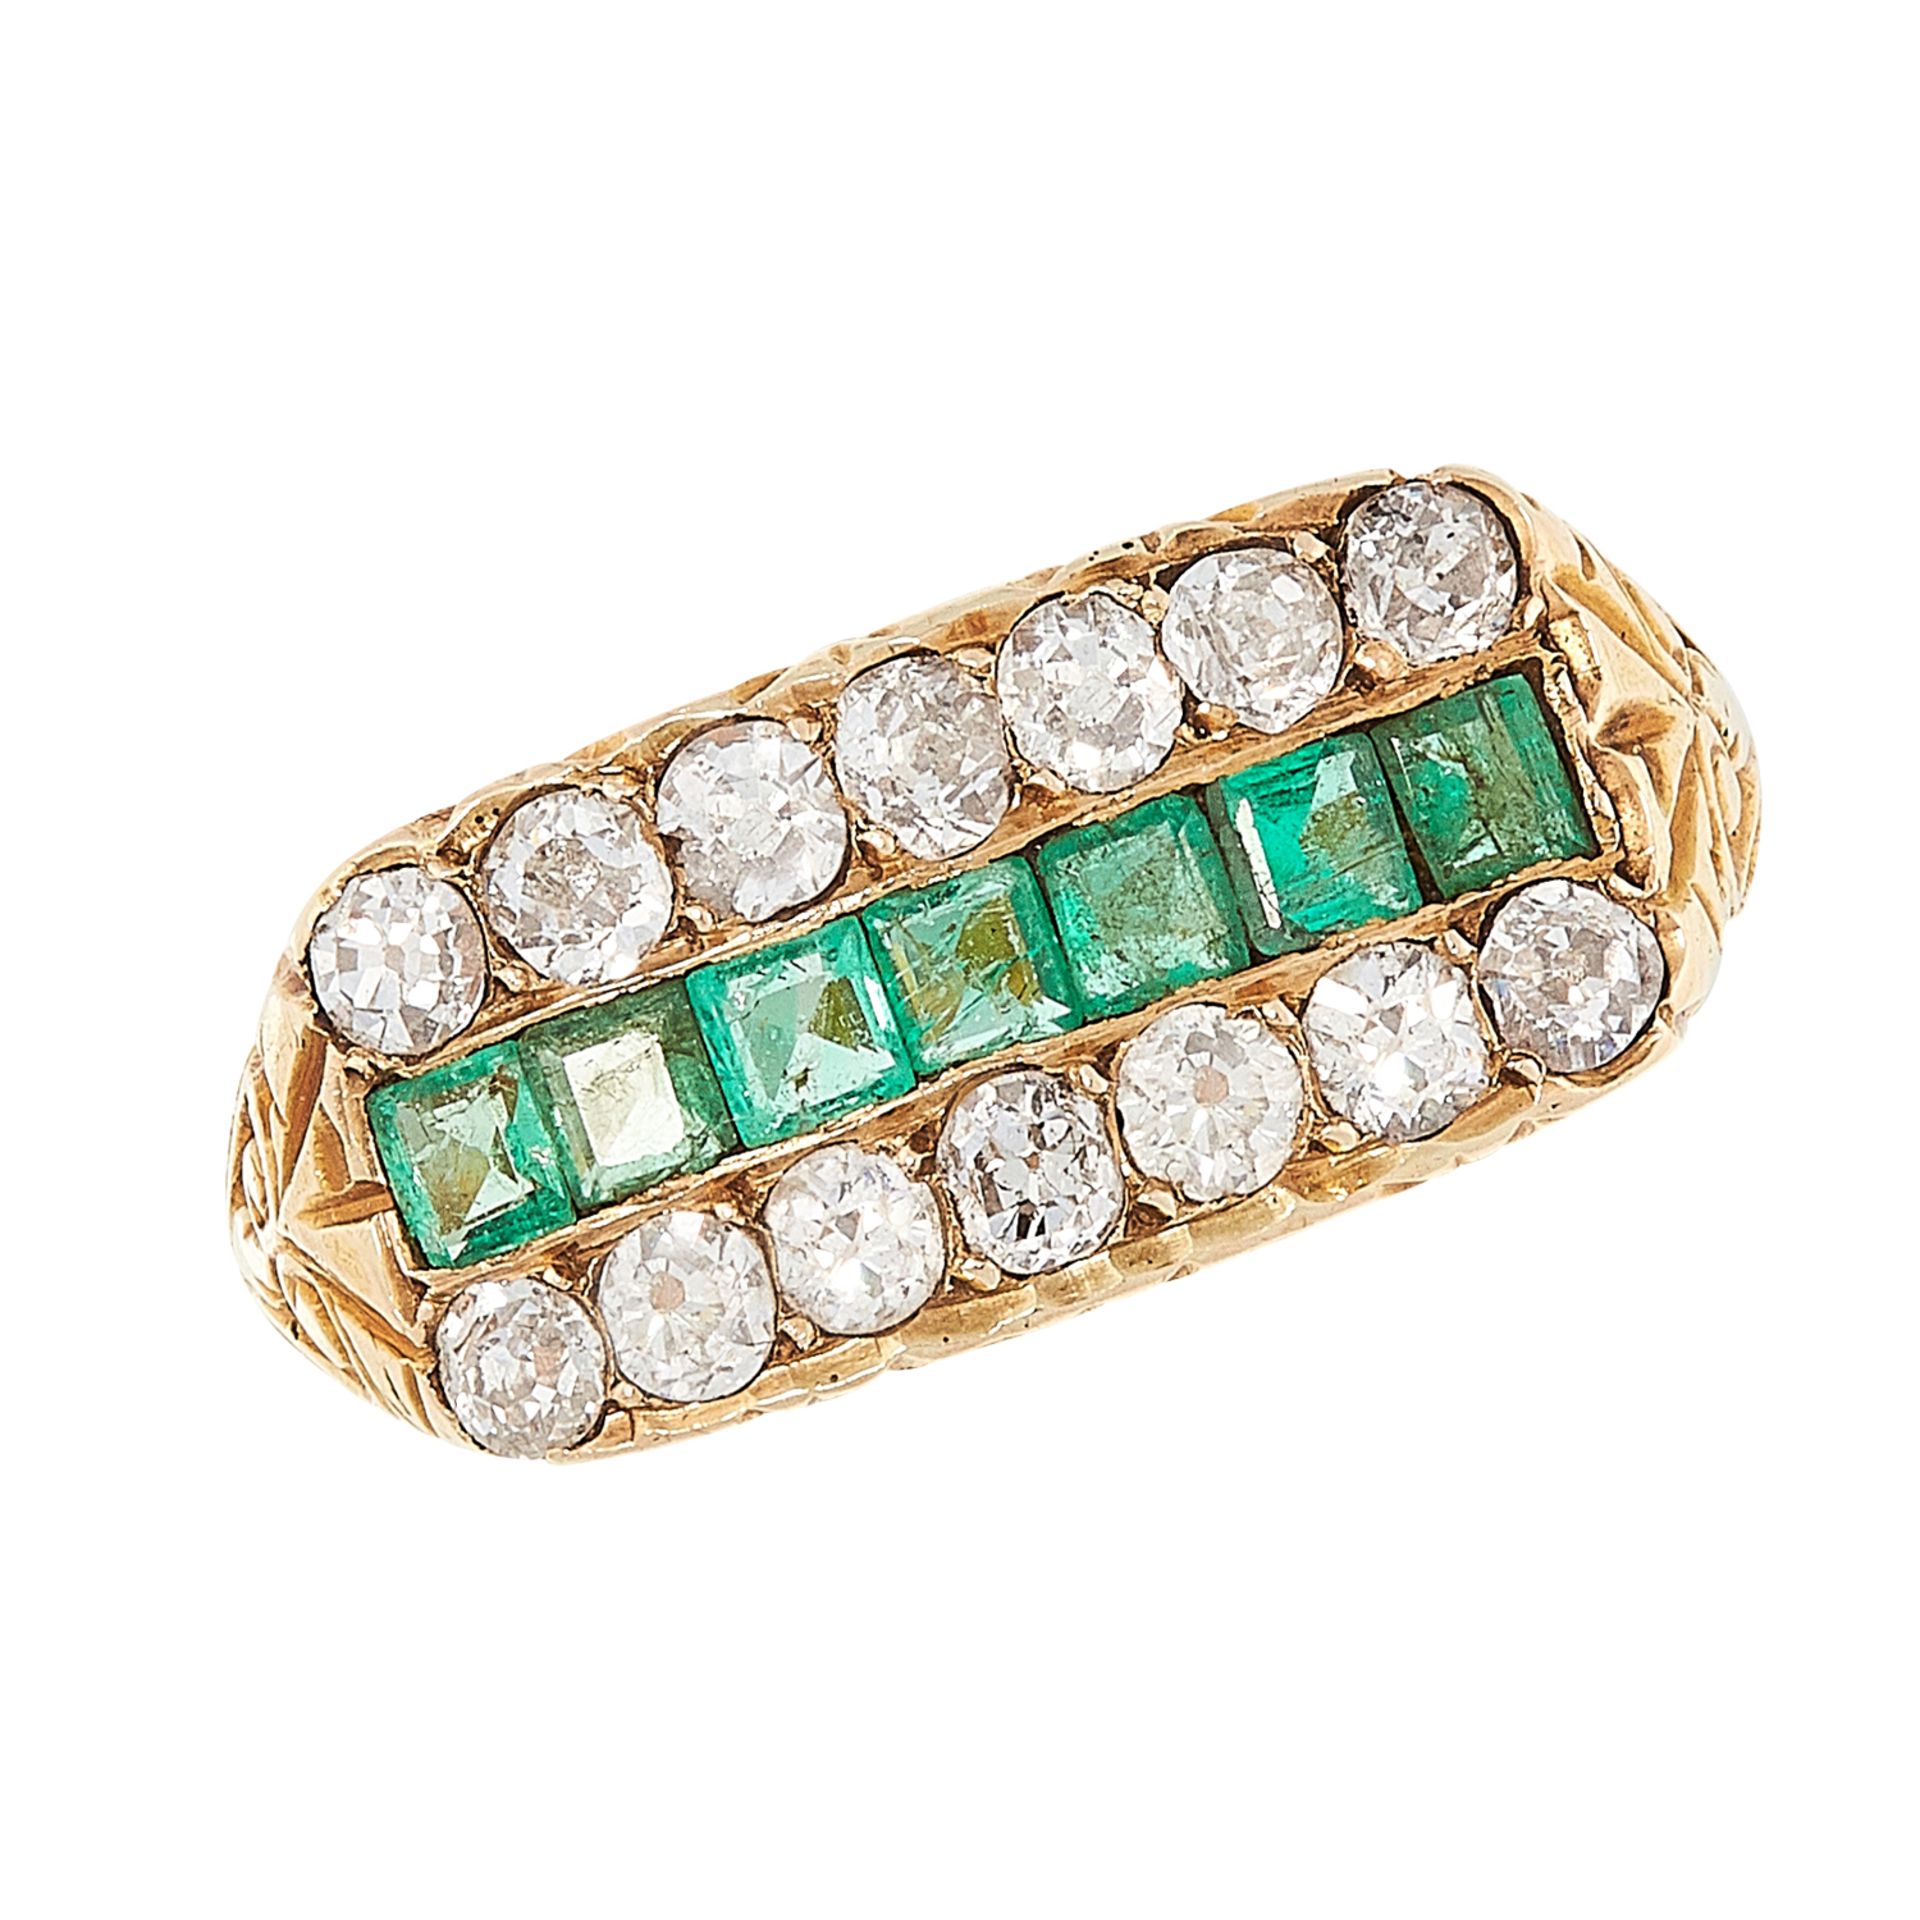 AN ANTIQUE VICTORIAN EMERALD AND DIAMOND RING in high carat yellow gold, comprising a row of step